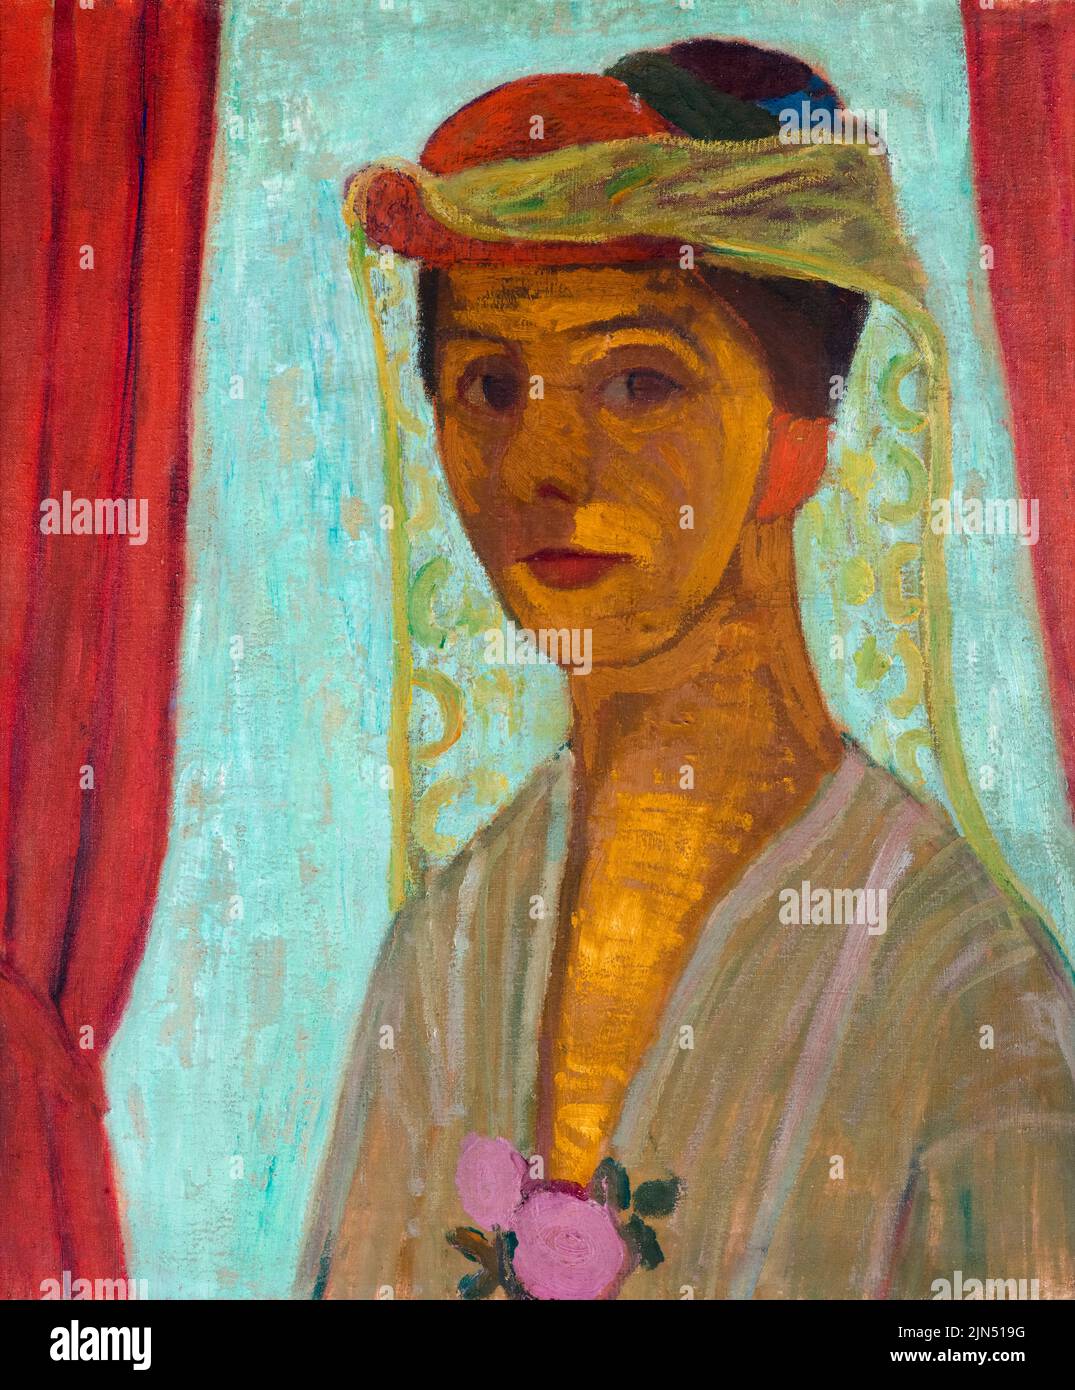 Paula Modersohn Becker (1876-1907), Self-portrait with hat and veil, painting in oil on canvas, 1906-1907 Stock Photo